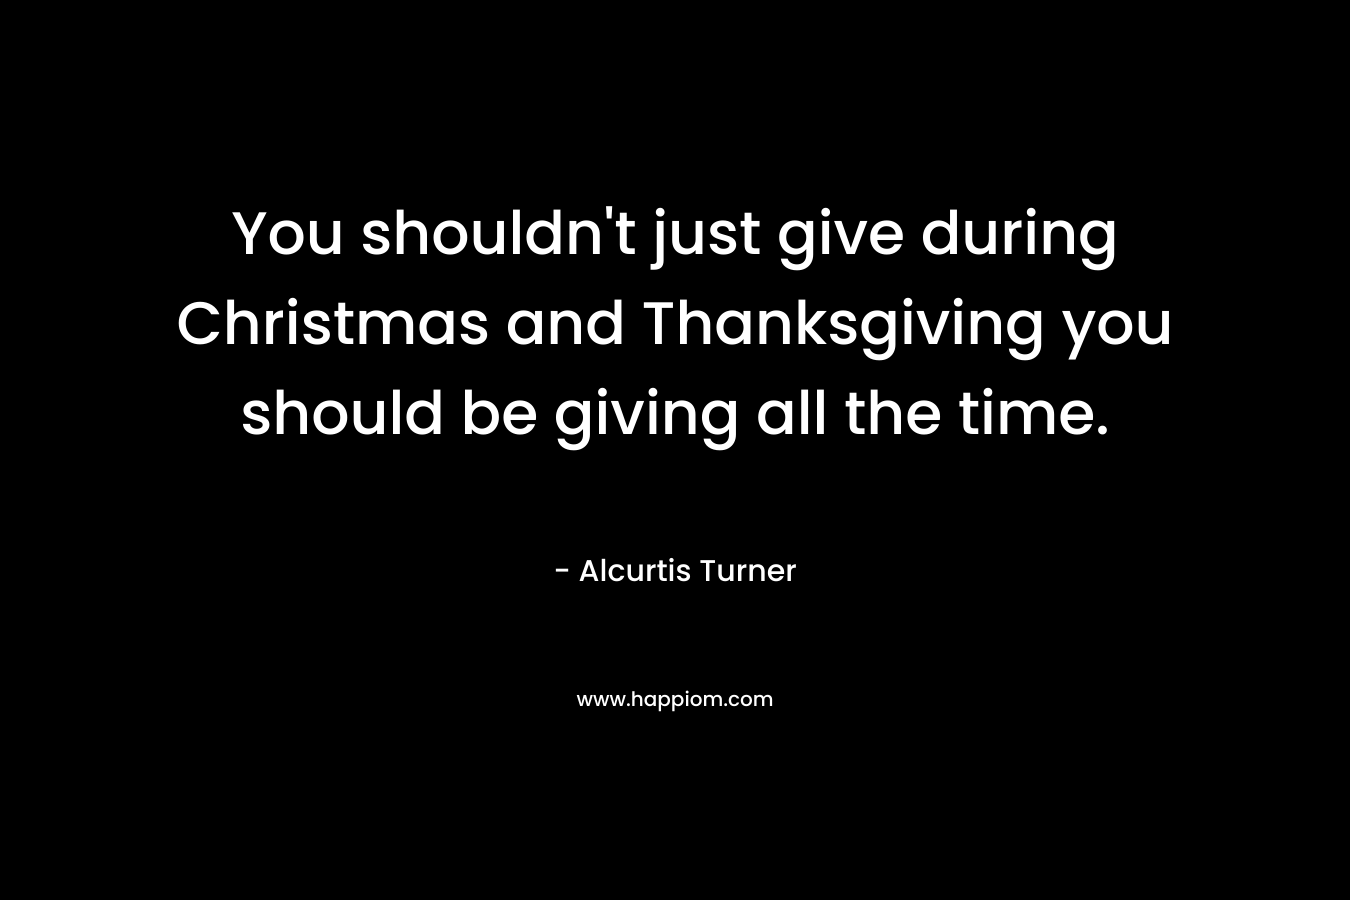 You shouldn't just give during Christmas and Thanksgiving you should be giving all the time.